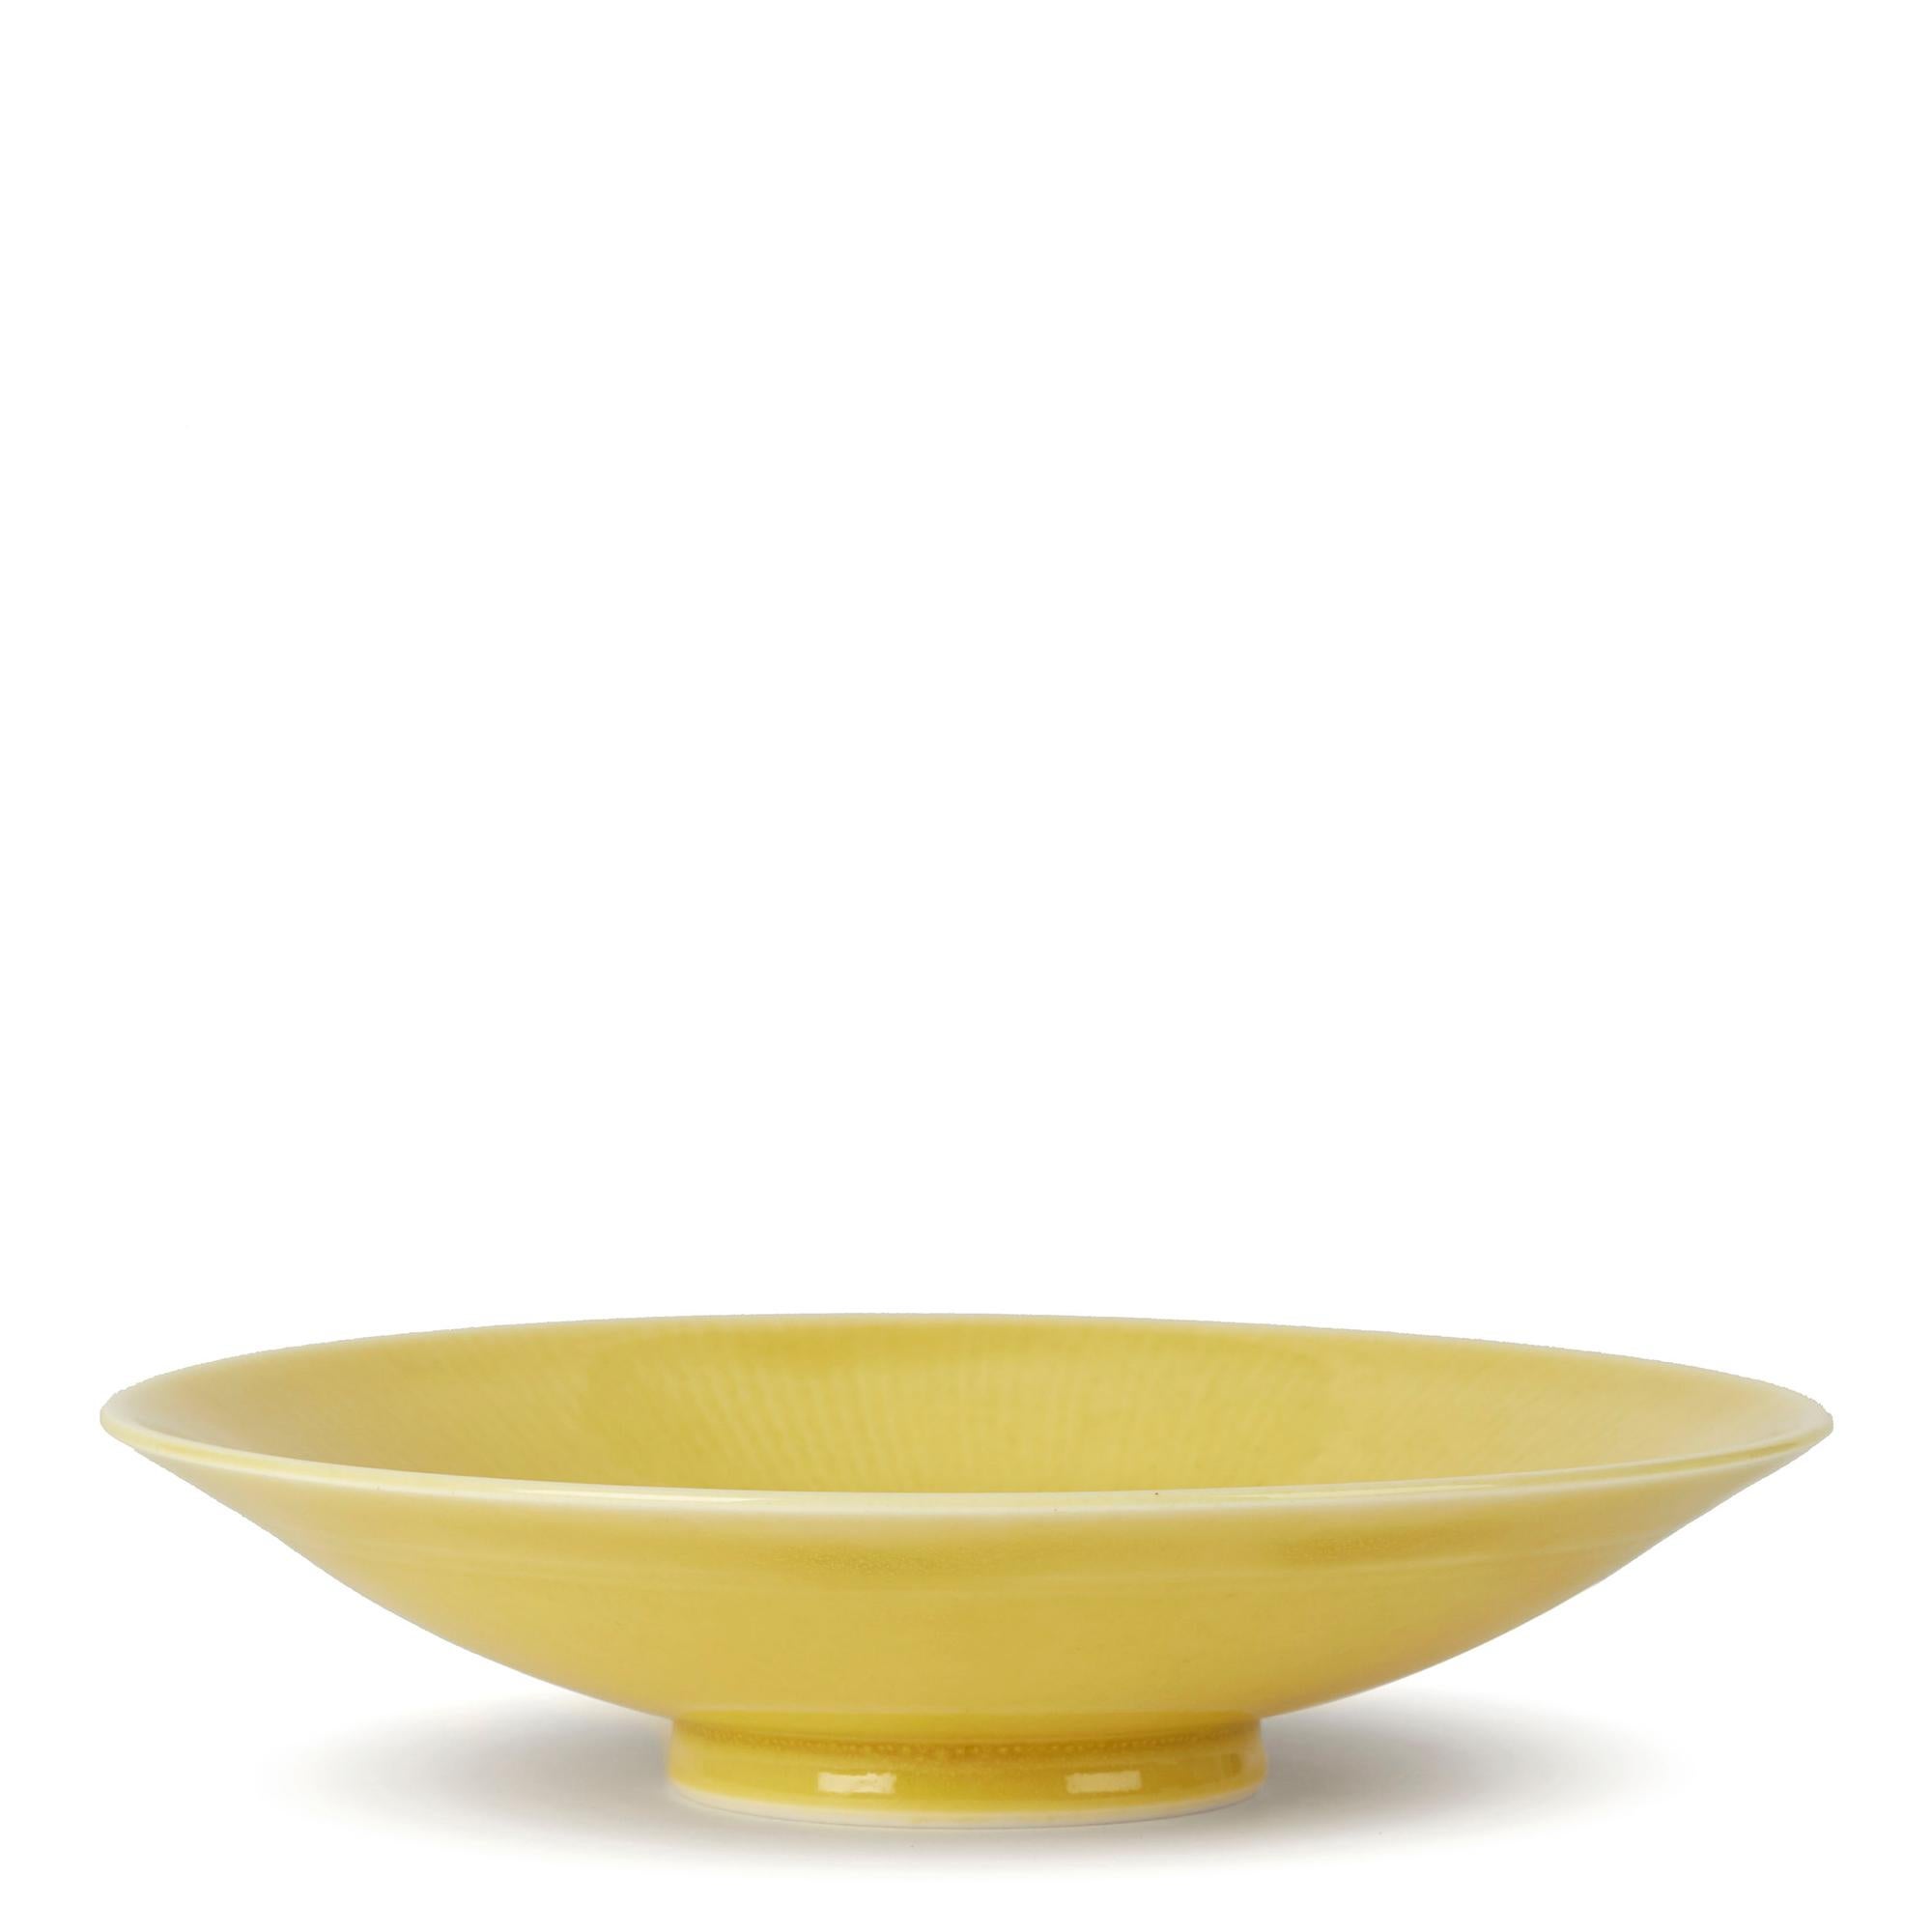 Late 20th Century William Mehornay Studio Pottery Porcelain Mustard Chatter Bowl, 1995 For Sale